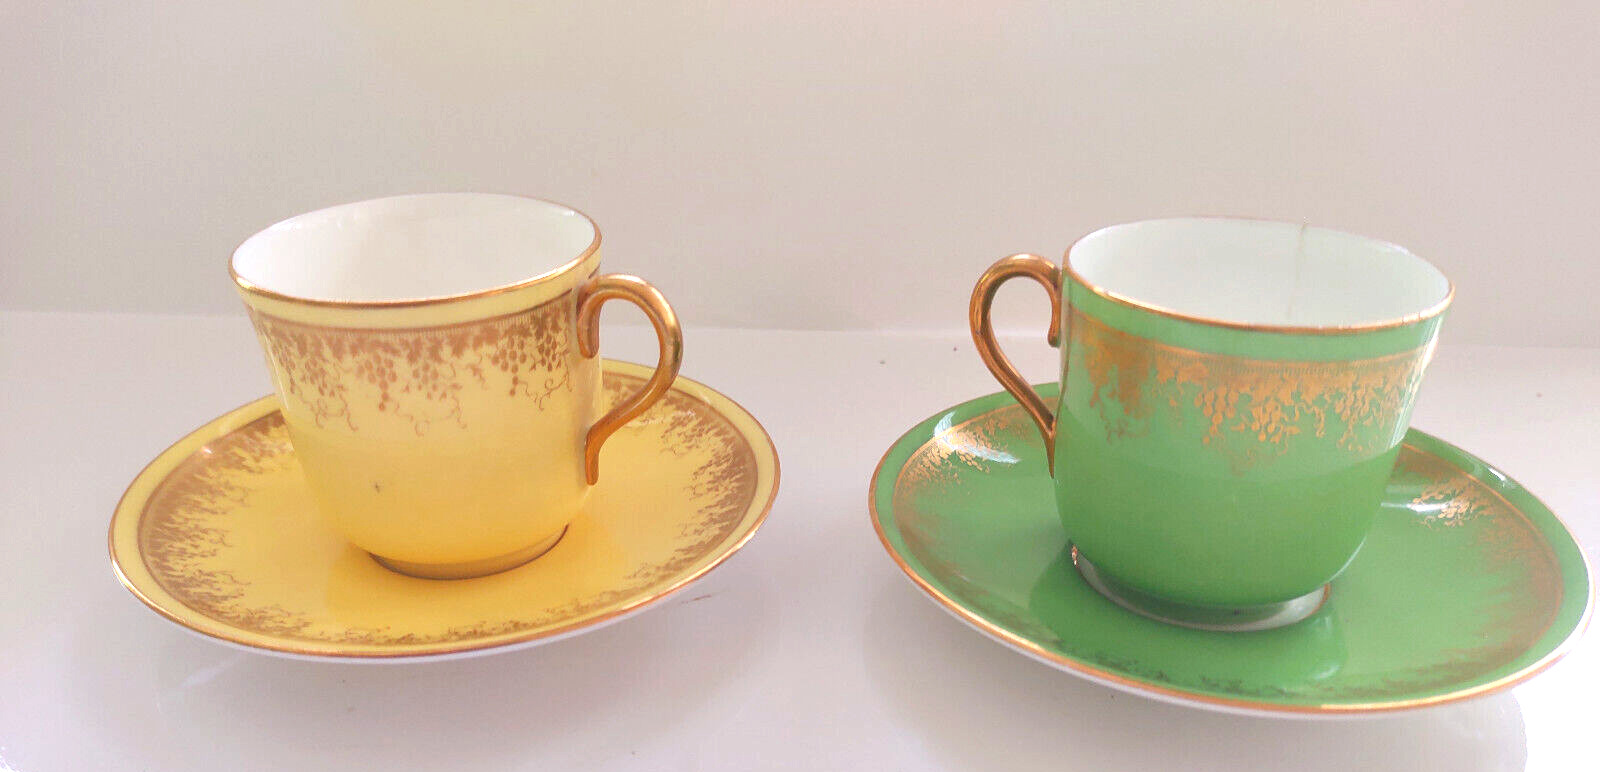 Vintage Coalport Bone China Demitasse Cups & Saucers Sets One Green/One Yellow